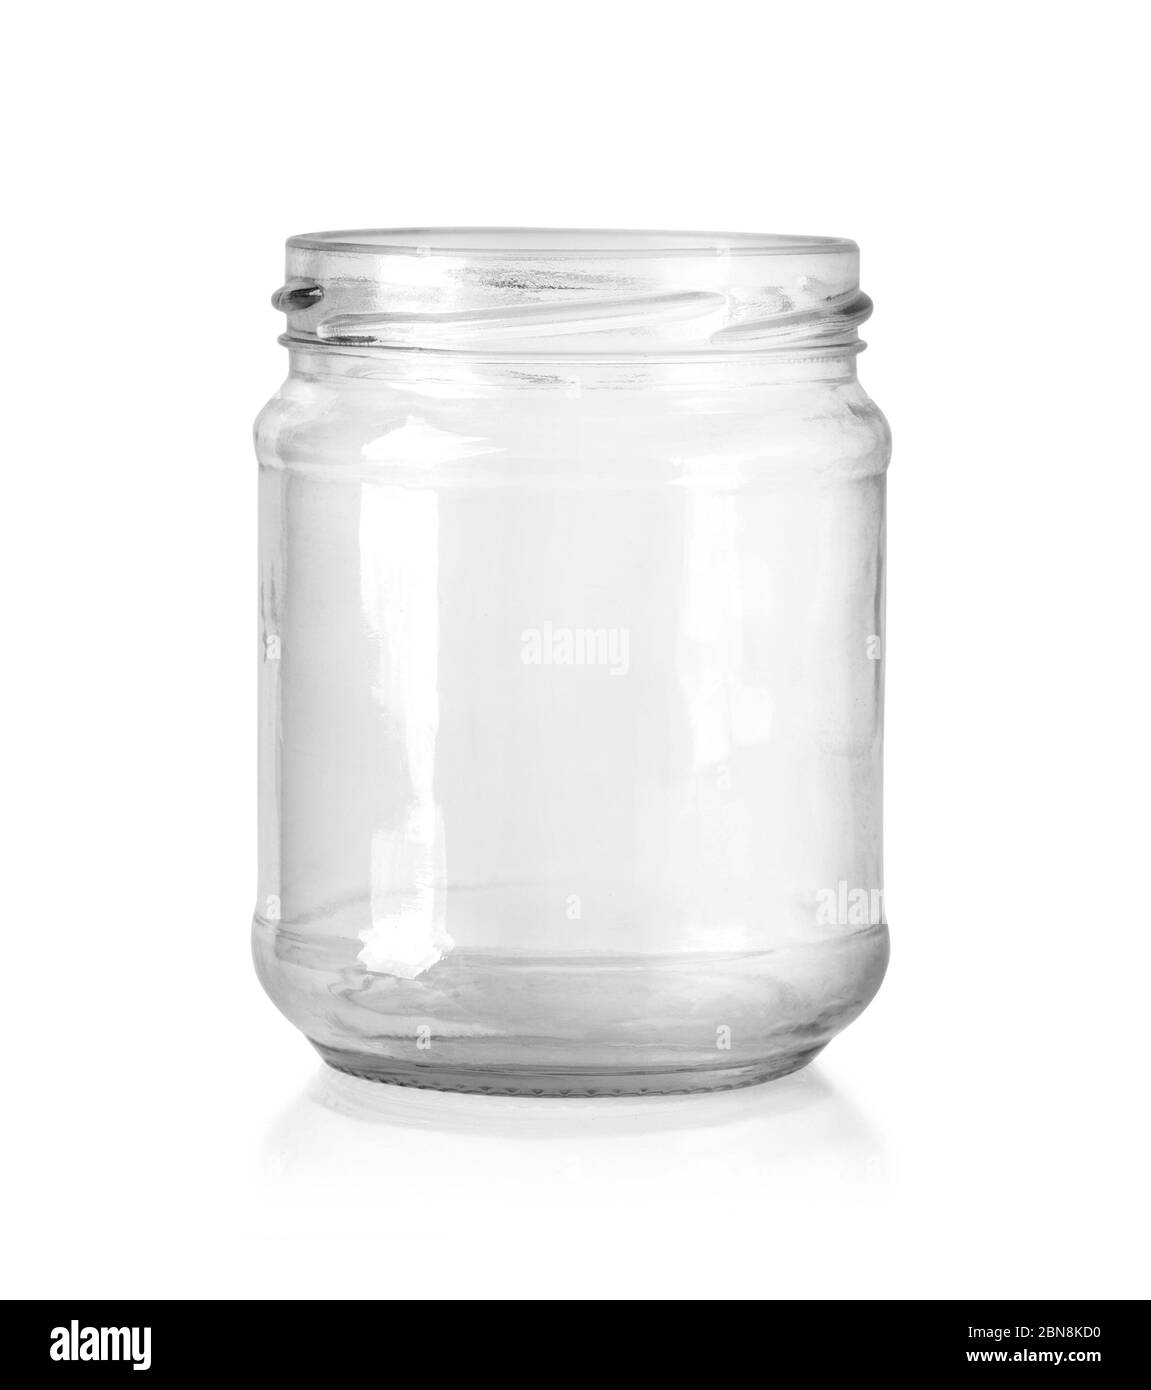 https://c8.alamy.com/comp/2BN8KD0/open-empty-glass-jar-for-food-and-canned-food-isolated-on-white-background-with-clipping-path-2BN8KD0.jpg